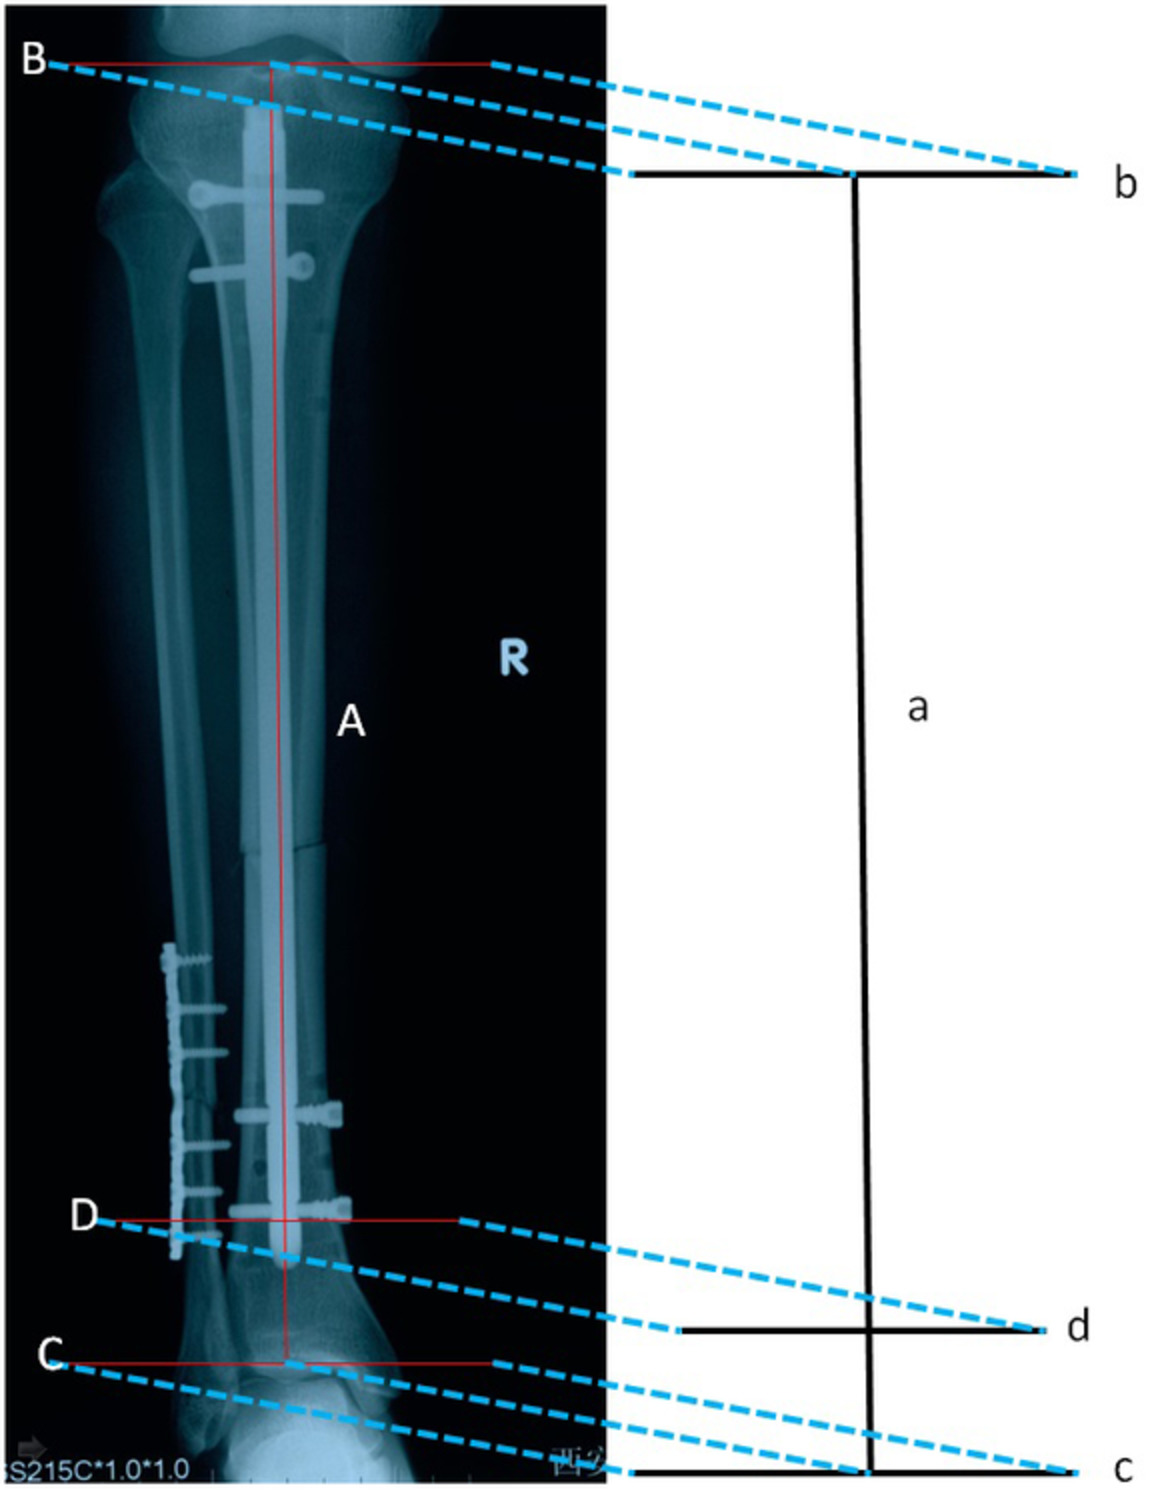 An Approach to Intraoperatively Identify the Coronal Plane Deformities of the Distal Tibia When Treating Tibial Fractures with Intramedullary Nail Fixation: a Retrospective Study